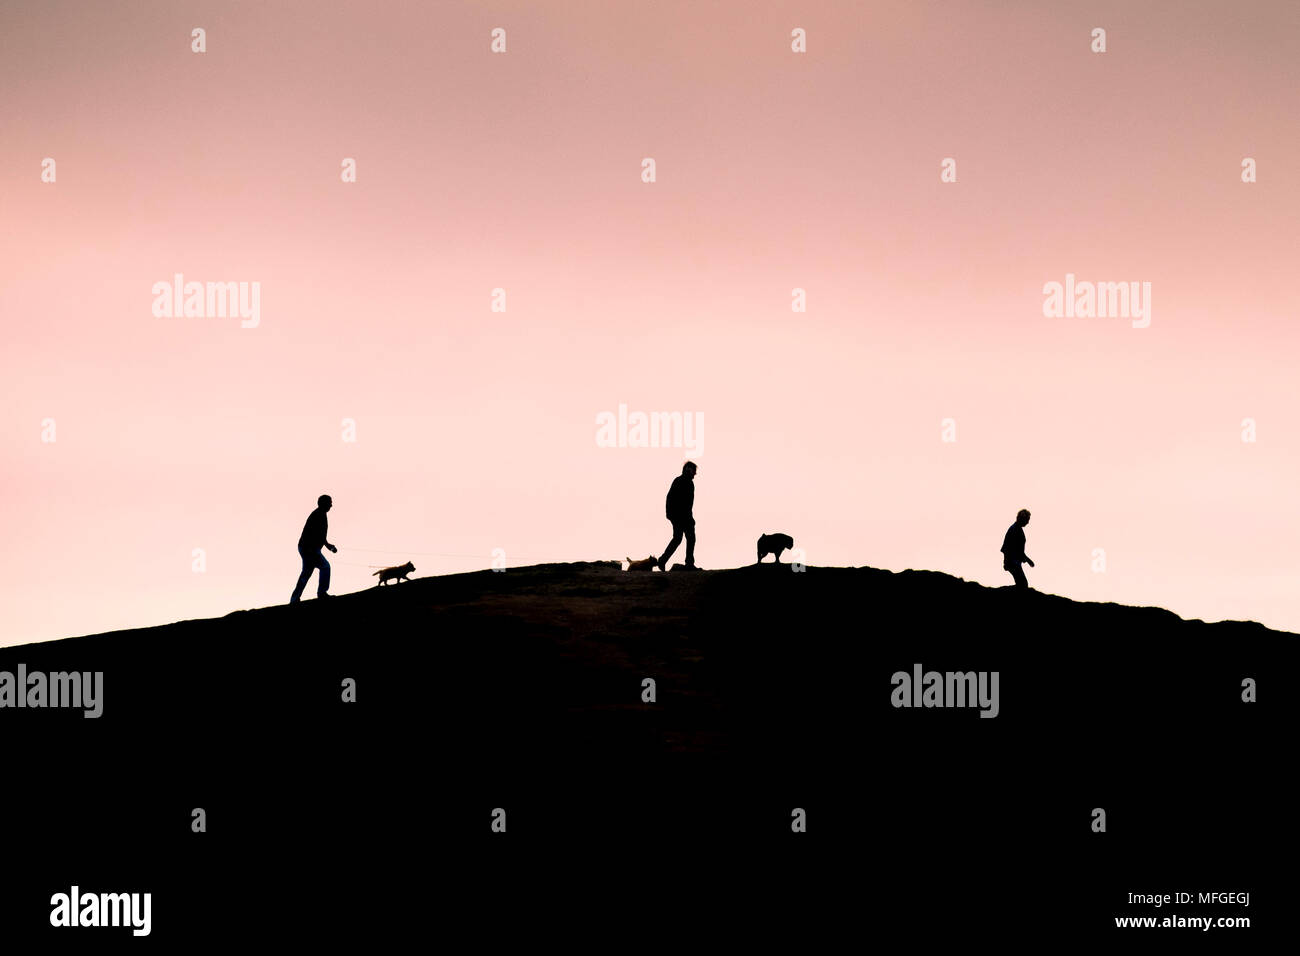 Dog walkers silhouetted against a vivid pink sky. Stock Photo